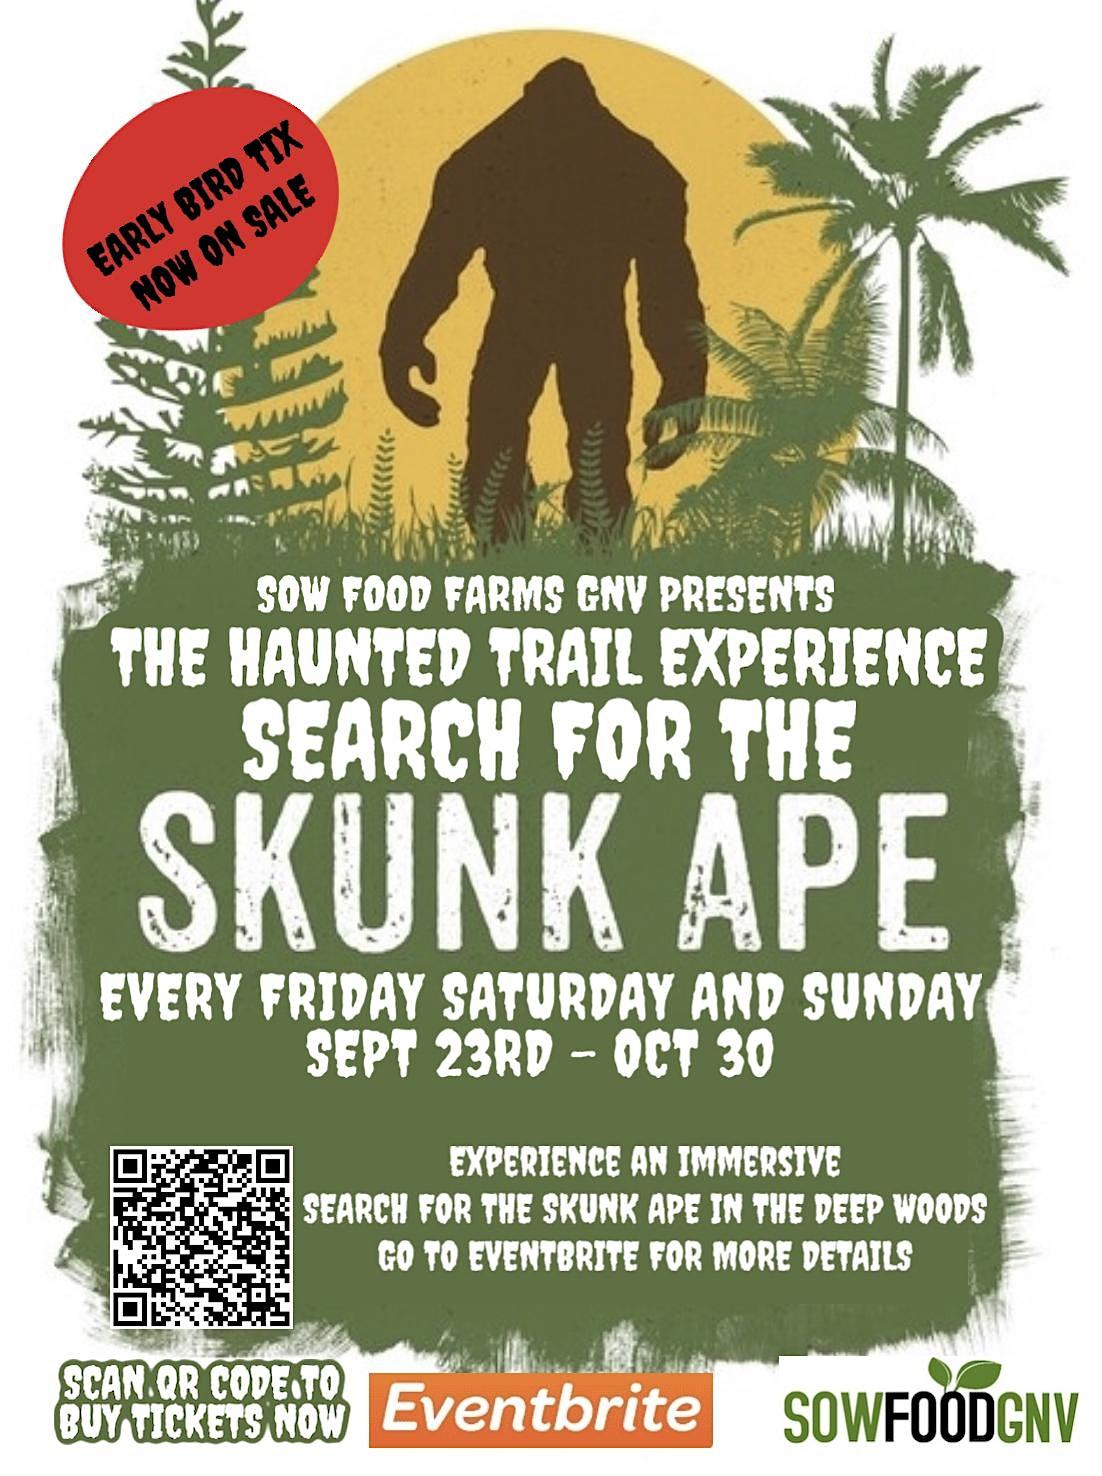 THE HAUNTED FOREST EXPERIENCE (SEARCH FOR THE SKUNK APE)
Fri Oct 21, 7:00 PM - Fri Oct 21, 10:00 PM